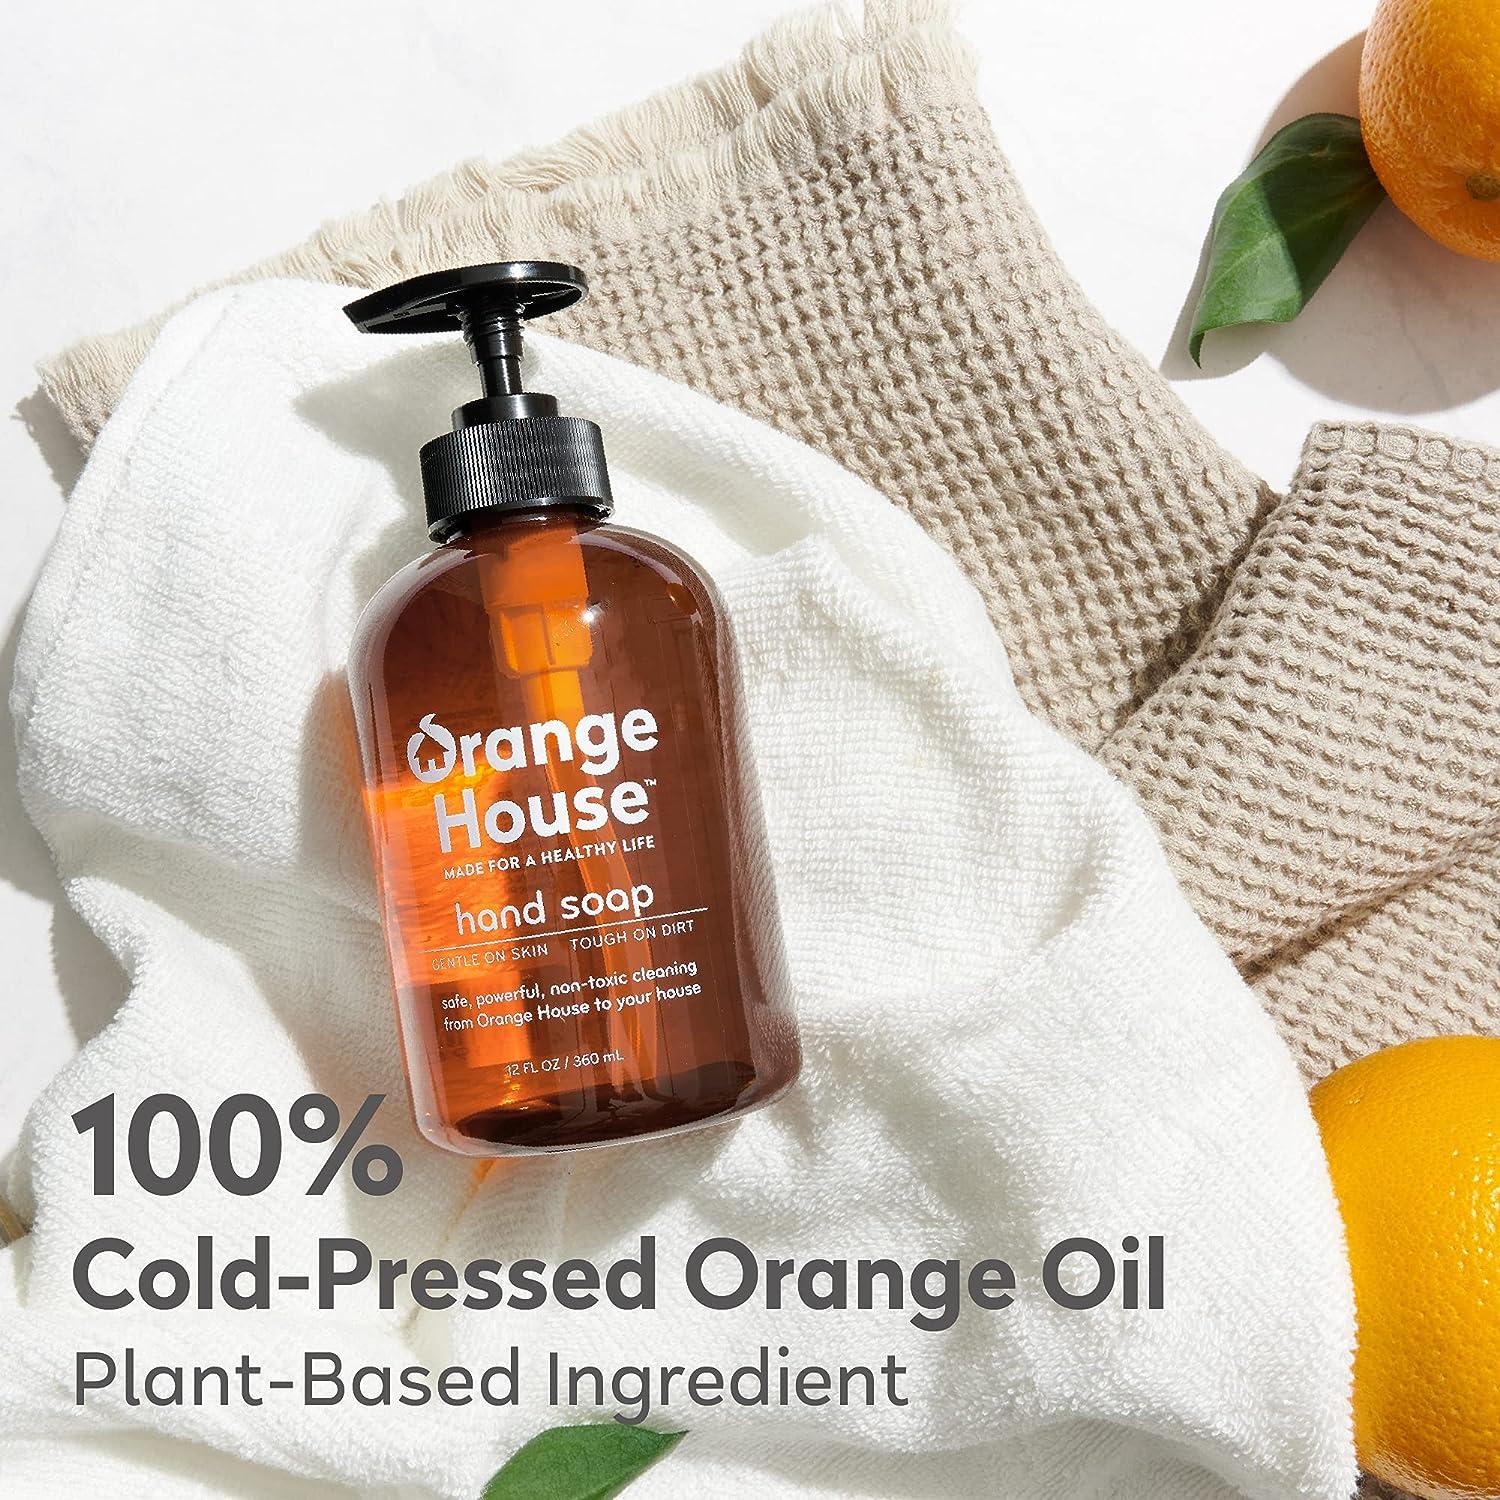  ORANGE HOUSE Natural Liquid Hand Soap with Food-Grade Orange  Oil, Cruelty-free, Soft and Moisturizing, 12 Fl Oz : Beauty & Personal Care